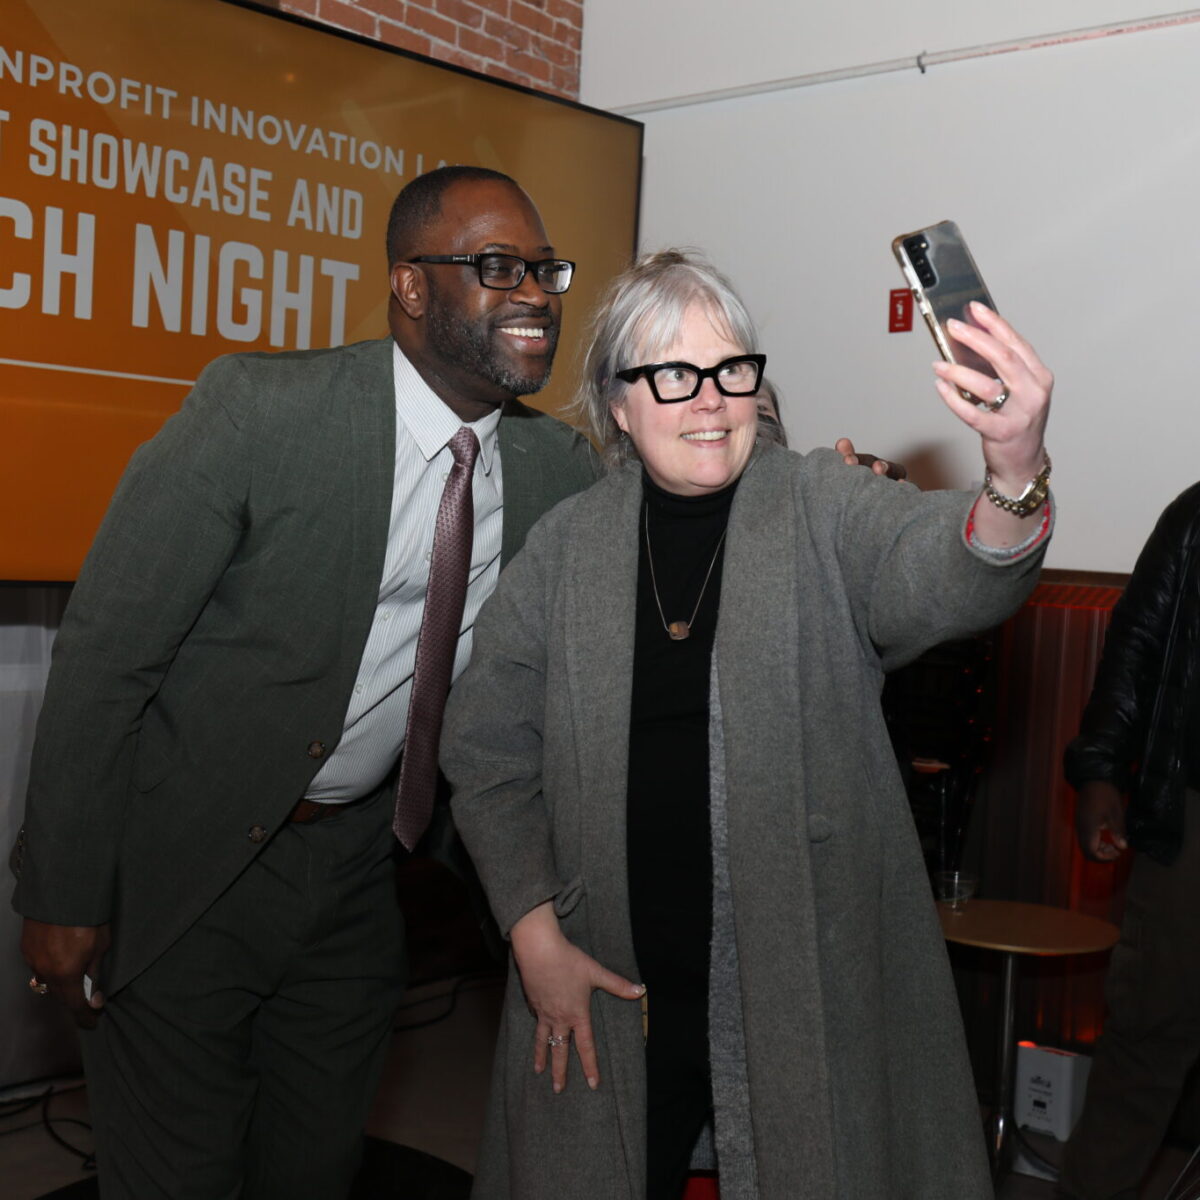 Lanre Ajakaiye, chief development officer for United Way of Rhode Island, takes a selfie with a community member.